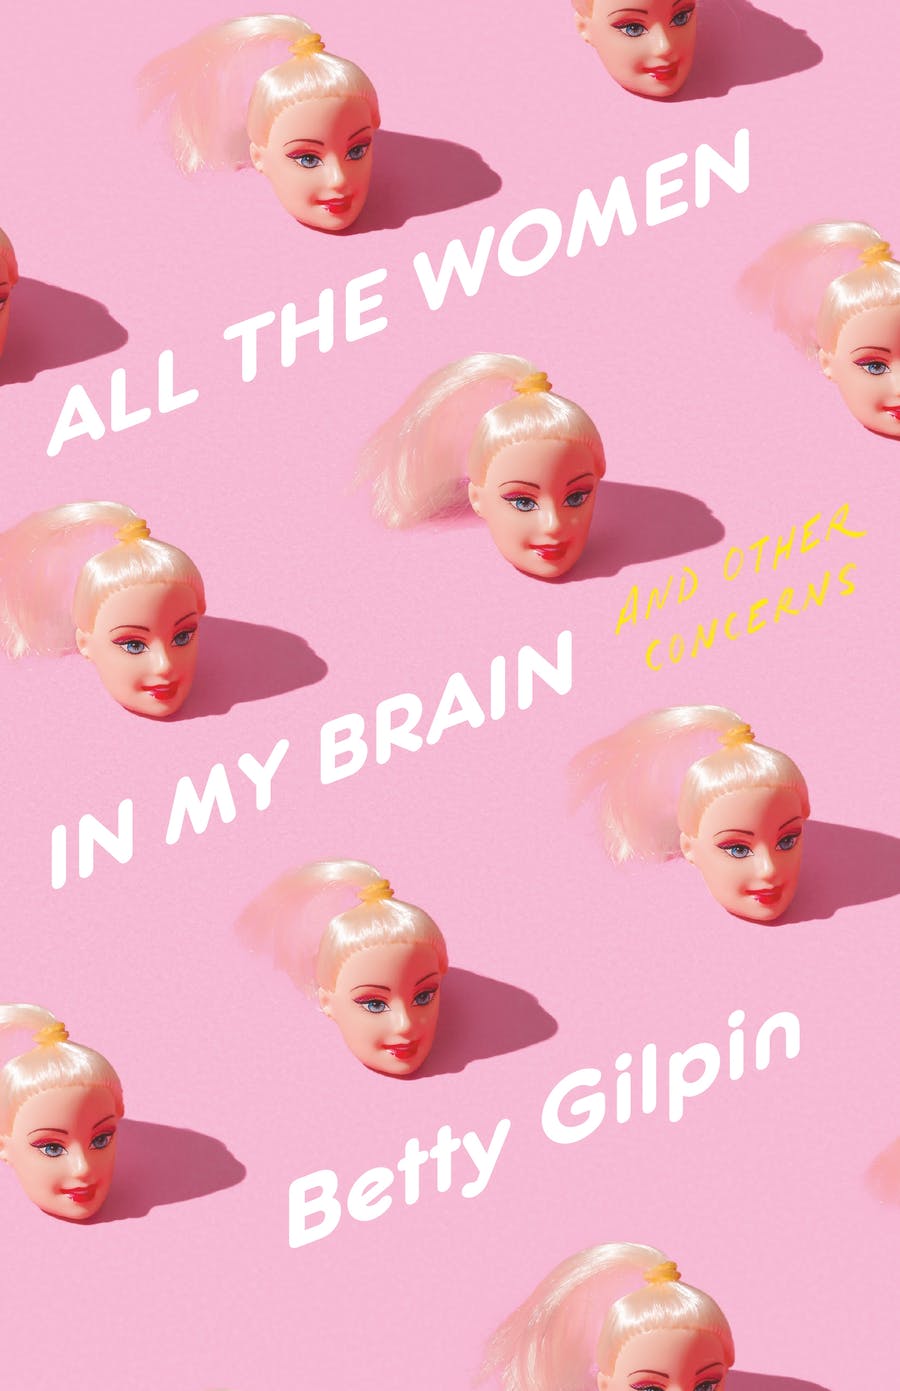 Cover art forAll the Women in My Brain